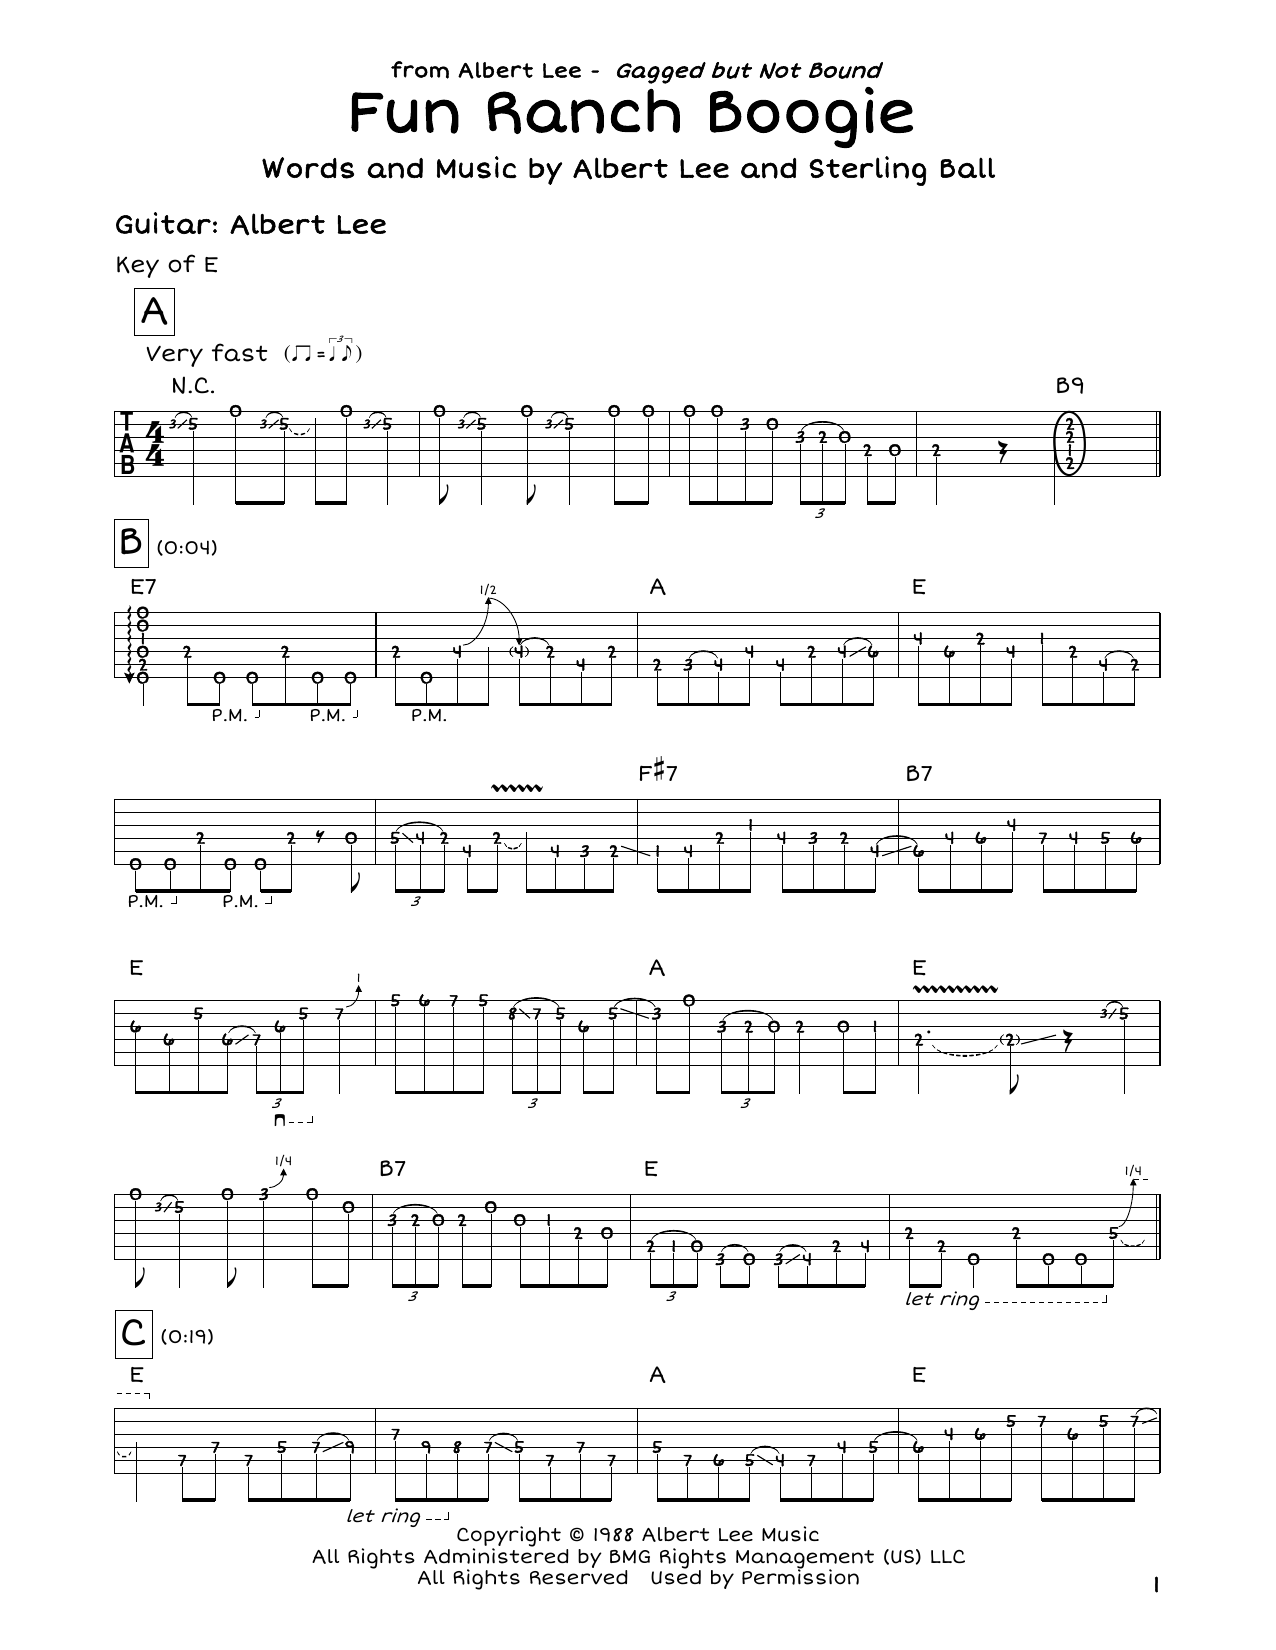 Albert Lee Fun Ranch Boogie sheet music notes and chords. Download Printable PDF.